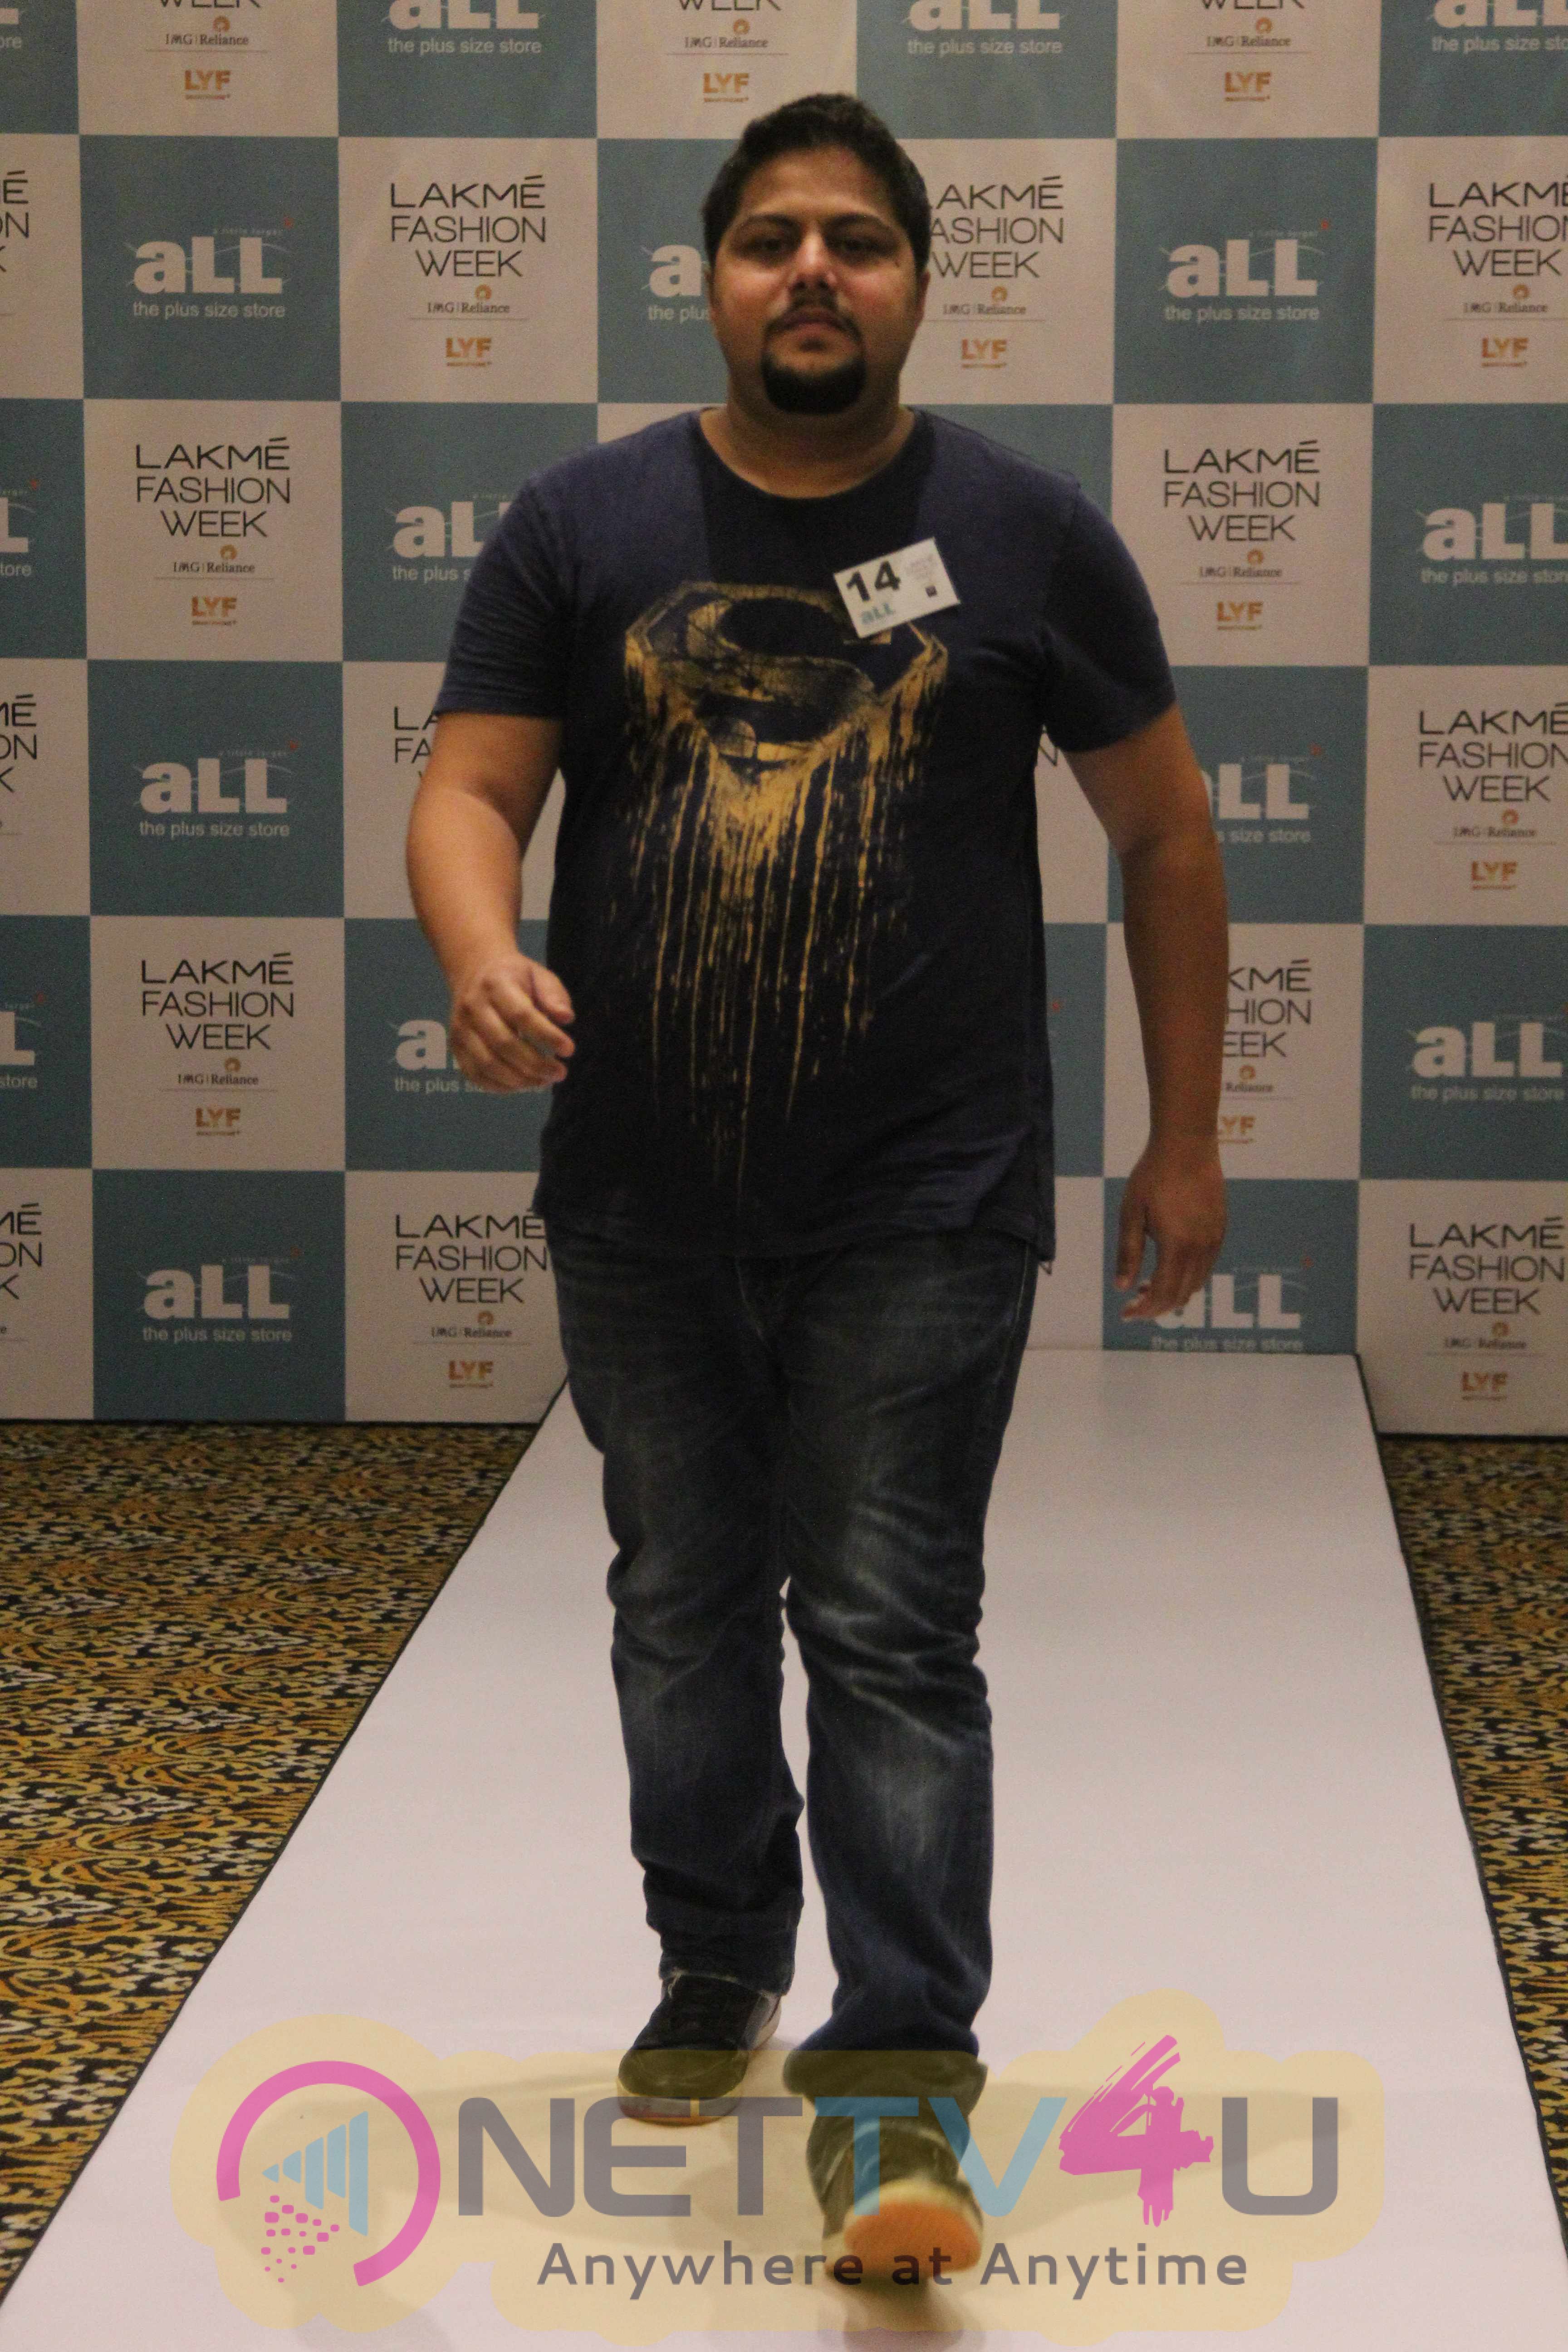 Lakme Fashion Week Host Open Auditions For India's First Ever Plus-size Fashion Show On 29 July 2016 In Mumbai Stills Hindi Gall